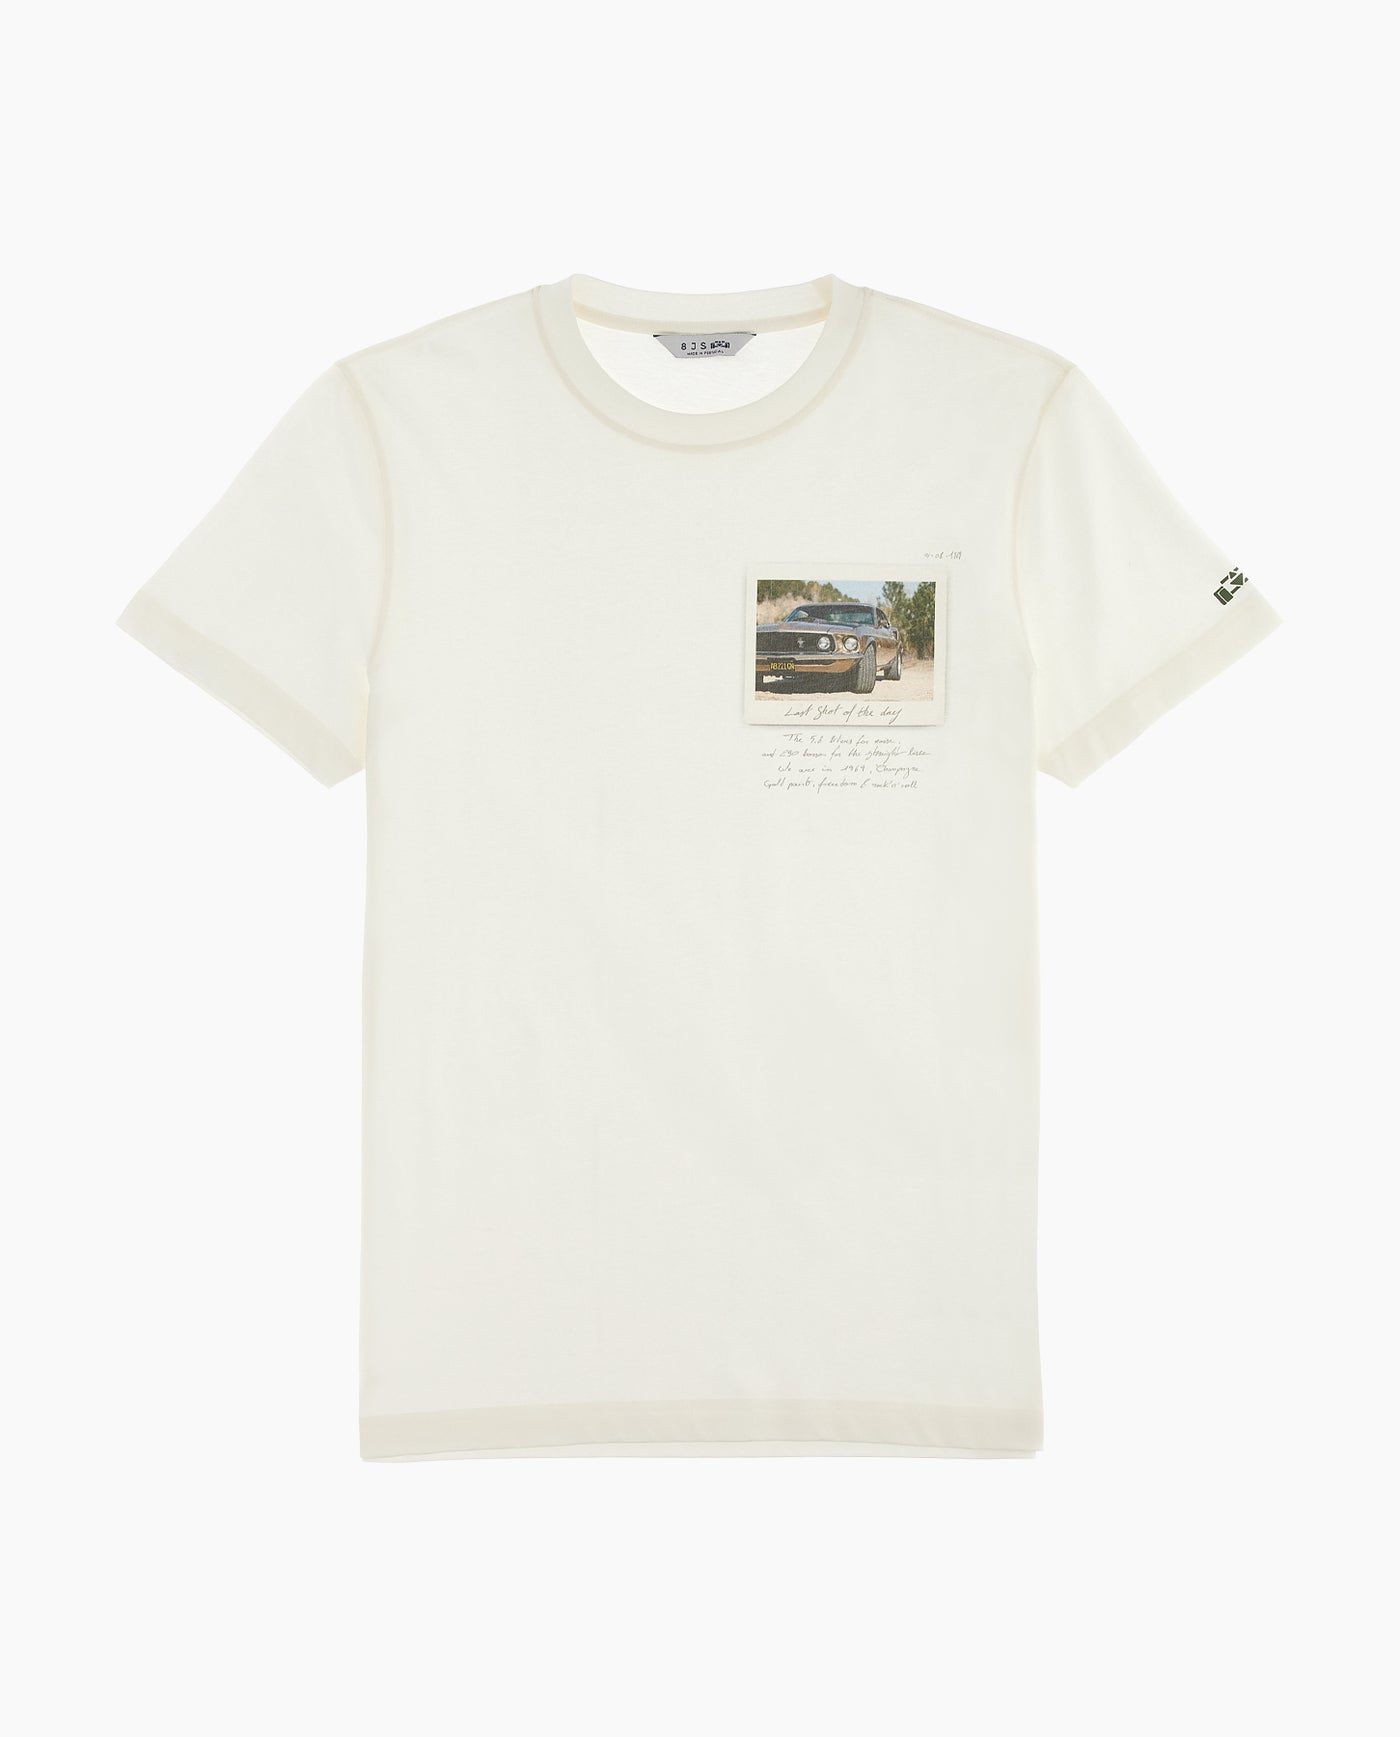 Greetings from Provence t-shirt - 8JS